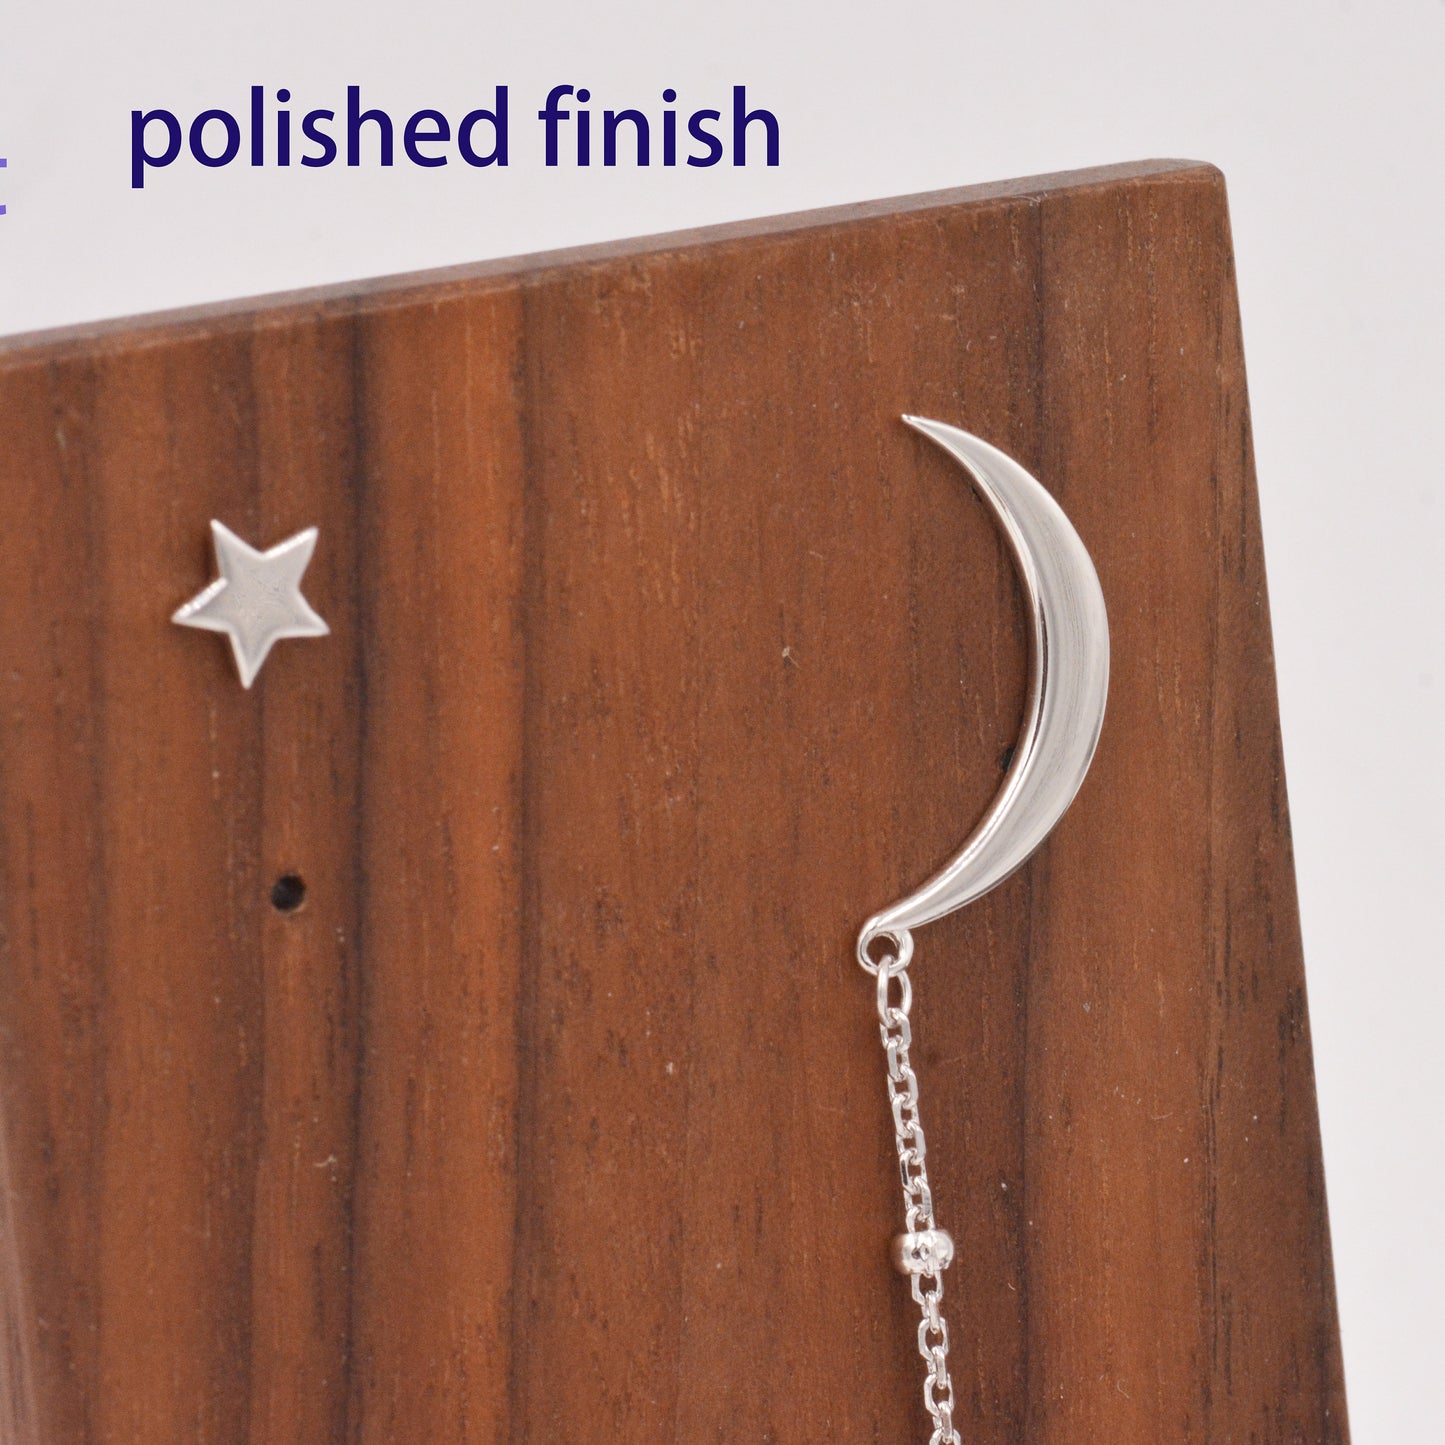 Sterling Silver Asymmetric Moon and Star Long Stud Earrings - - Silver or Gold - Drop Dangling Earrings  -  Cute Fun and Quirky